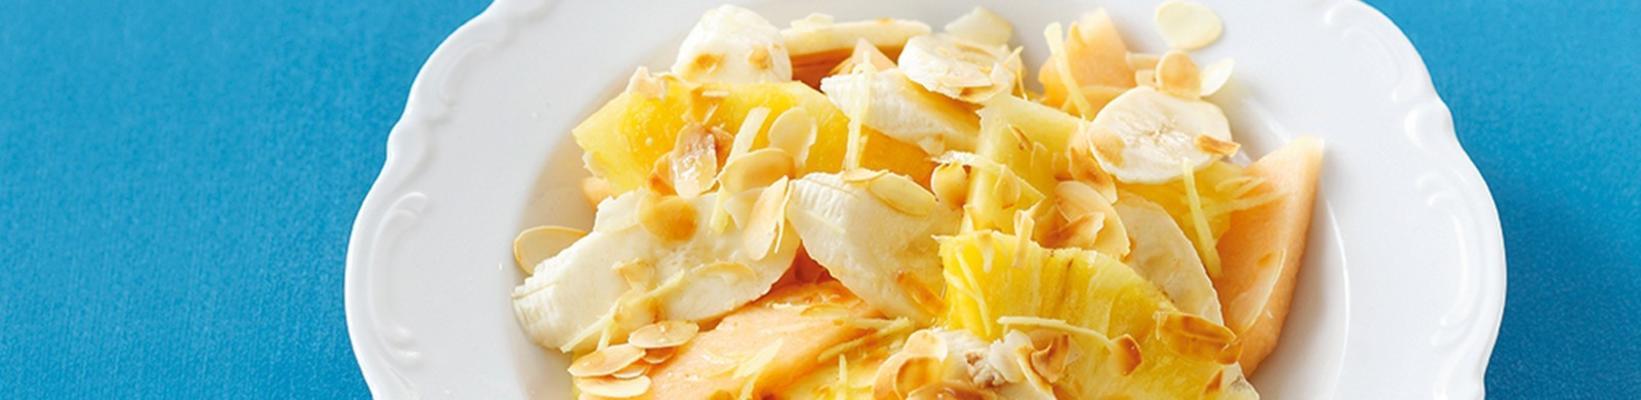 yellow fruit salad with ginger